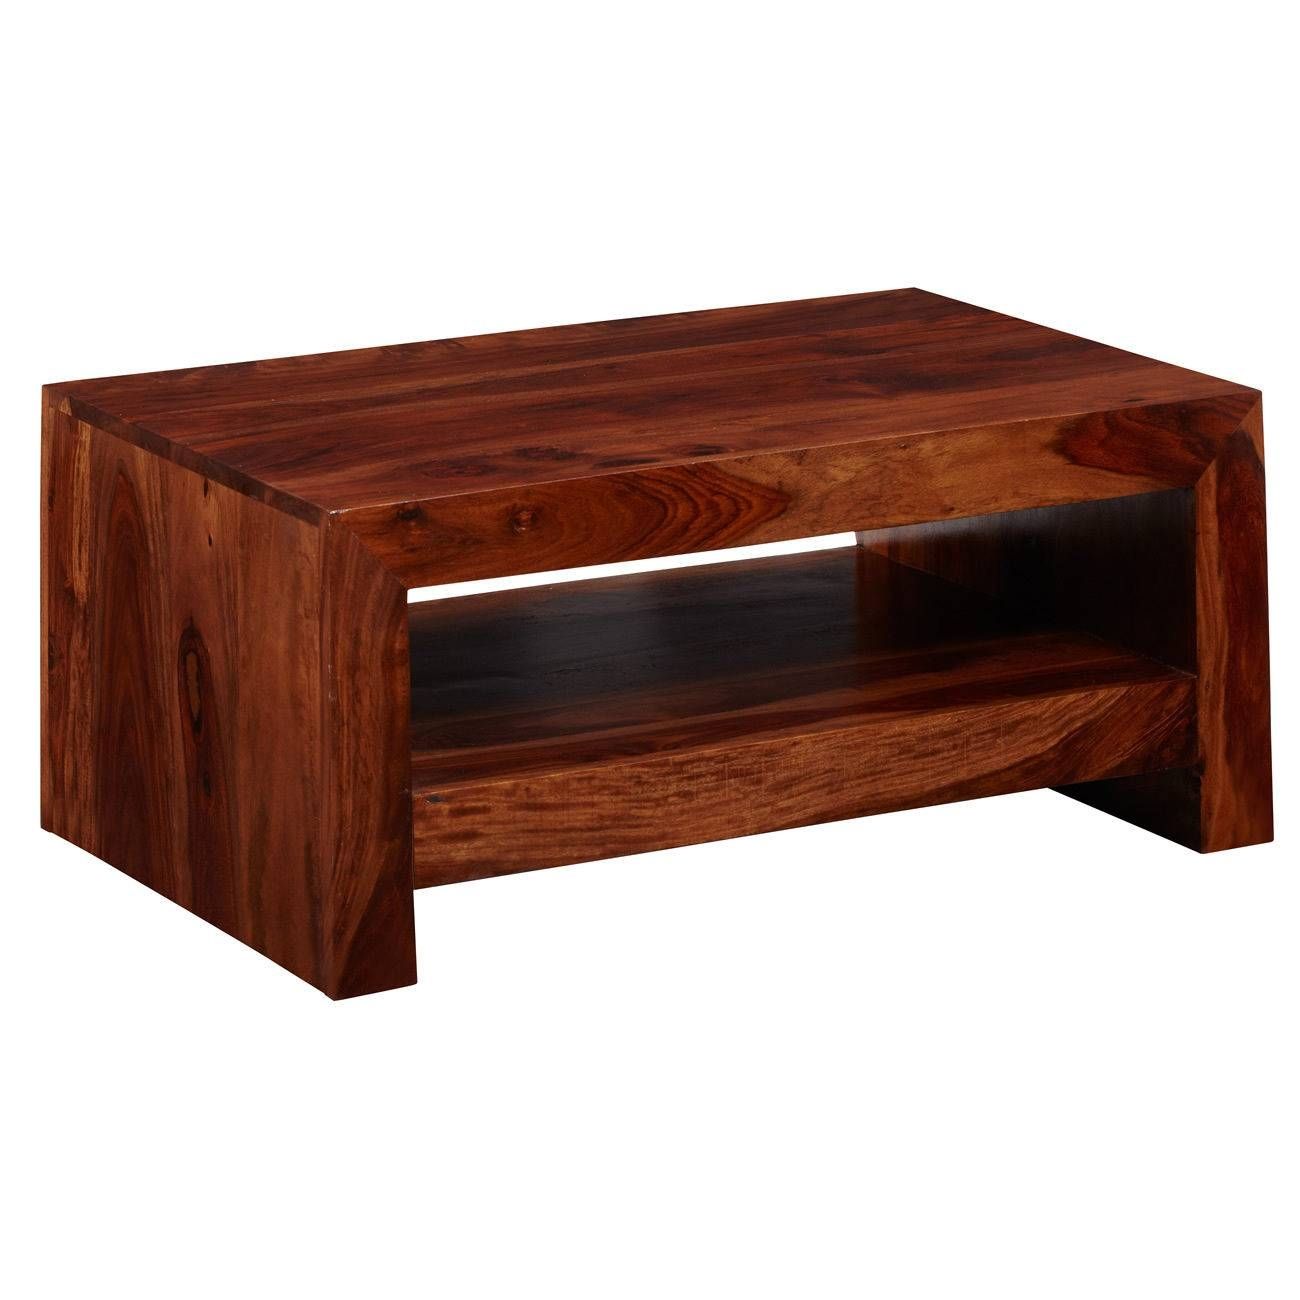 Coffee Table: Enchanting Wooden Coffee Table Rustic Wooden Coffee In Chunky Wood Coffee Tables (View 9 of 30)